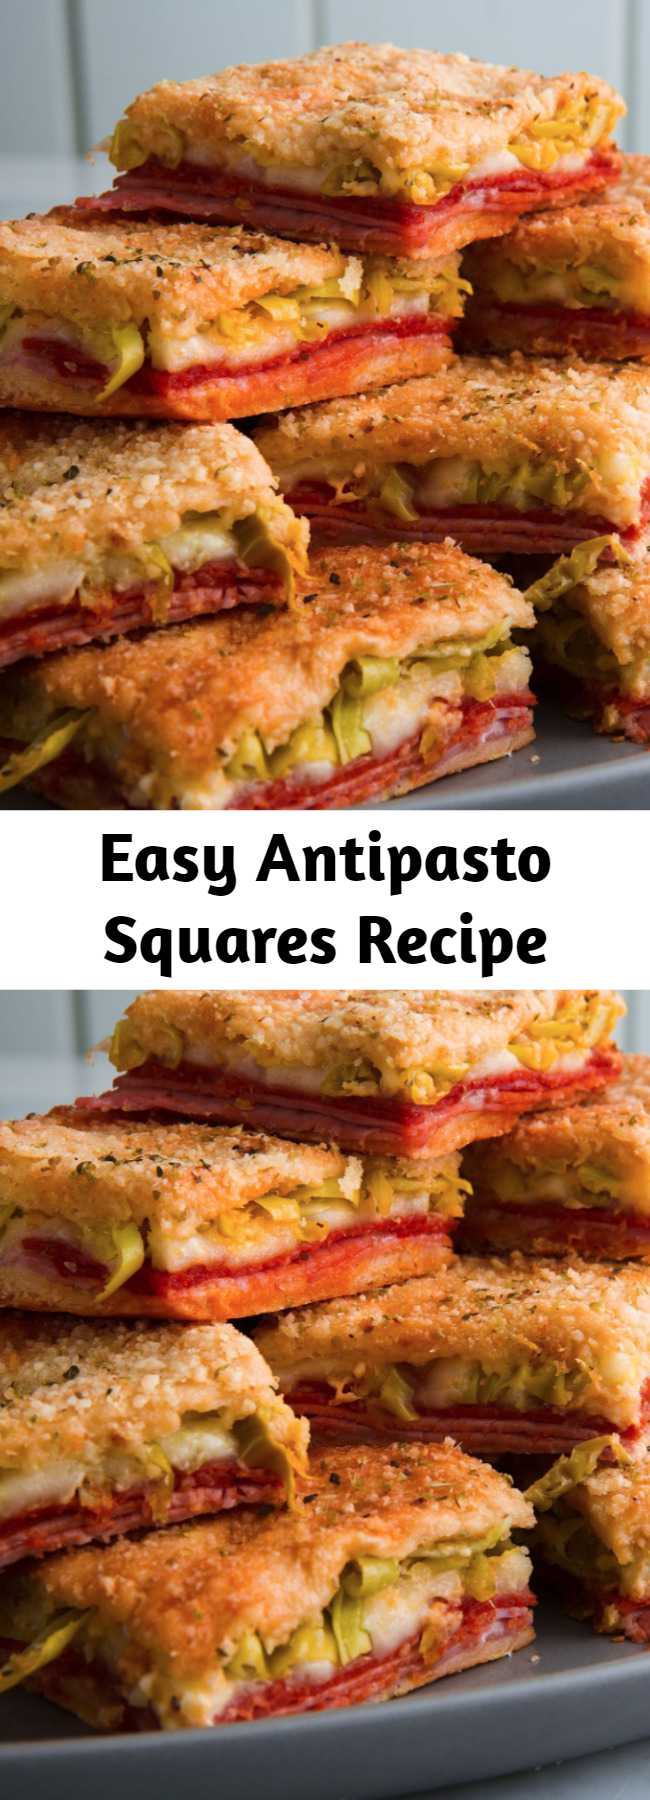 Easy Antipasto Squares Recipe - Turns out an antipasto salad like this gets even better when you layer it between crescent sheets and we aren't mad about that at all. #easy #recipe #antipasto #pizza #squares #bites #superbowlrecipe #superbowl #gameday #appetizer #snack #cheese #crescentroll